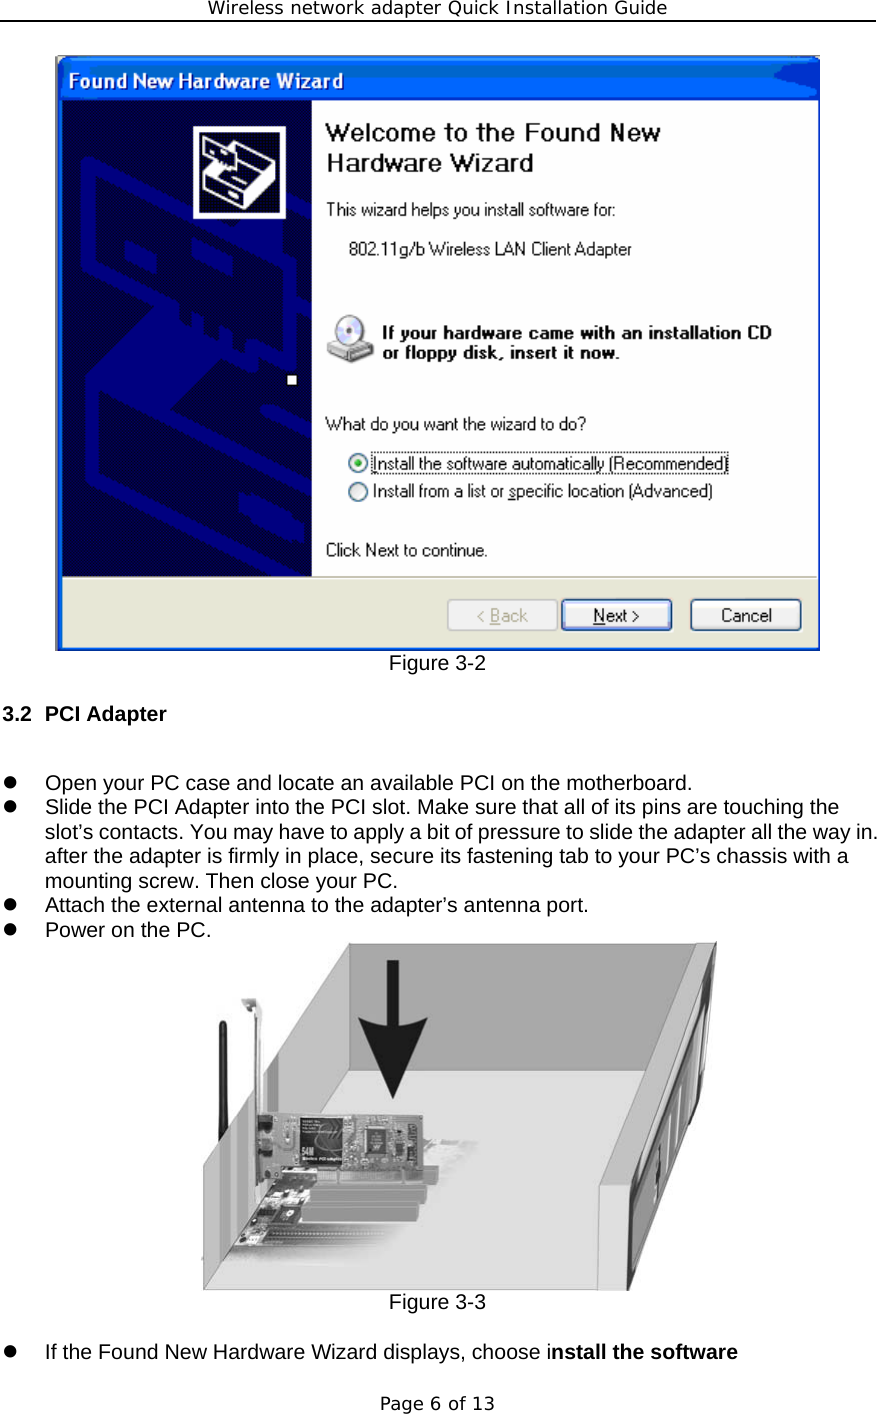 Wireless network adapter Quick Installation Guide Page 6 of 13  Figure 3-2 3.2 PCI Adapter  z  Open your PC case and locate an available PCI on the motherboard. z  Slide the PCI Adapter into the PCI slot. Make sure that all of its pins are touching the slot’s contacts. You may have to apply a bit of pressure to slide the adapter all the way in. after the adapter is firmly in place, secure its fastening tab to your PC’s chassis with a mounting screw. Then close your PC. z  Attach the external antenna to the adapter’s antenna port. z  Power on the PC.  Figure 3-3  z  If the Found New Hardware Wizard displays, choose install the software 